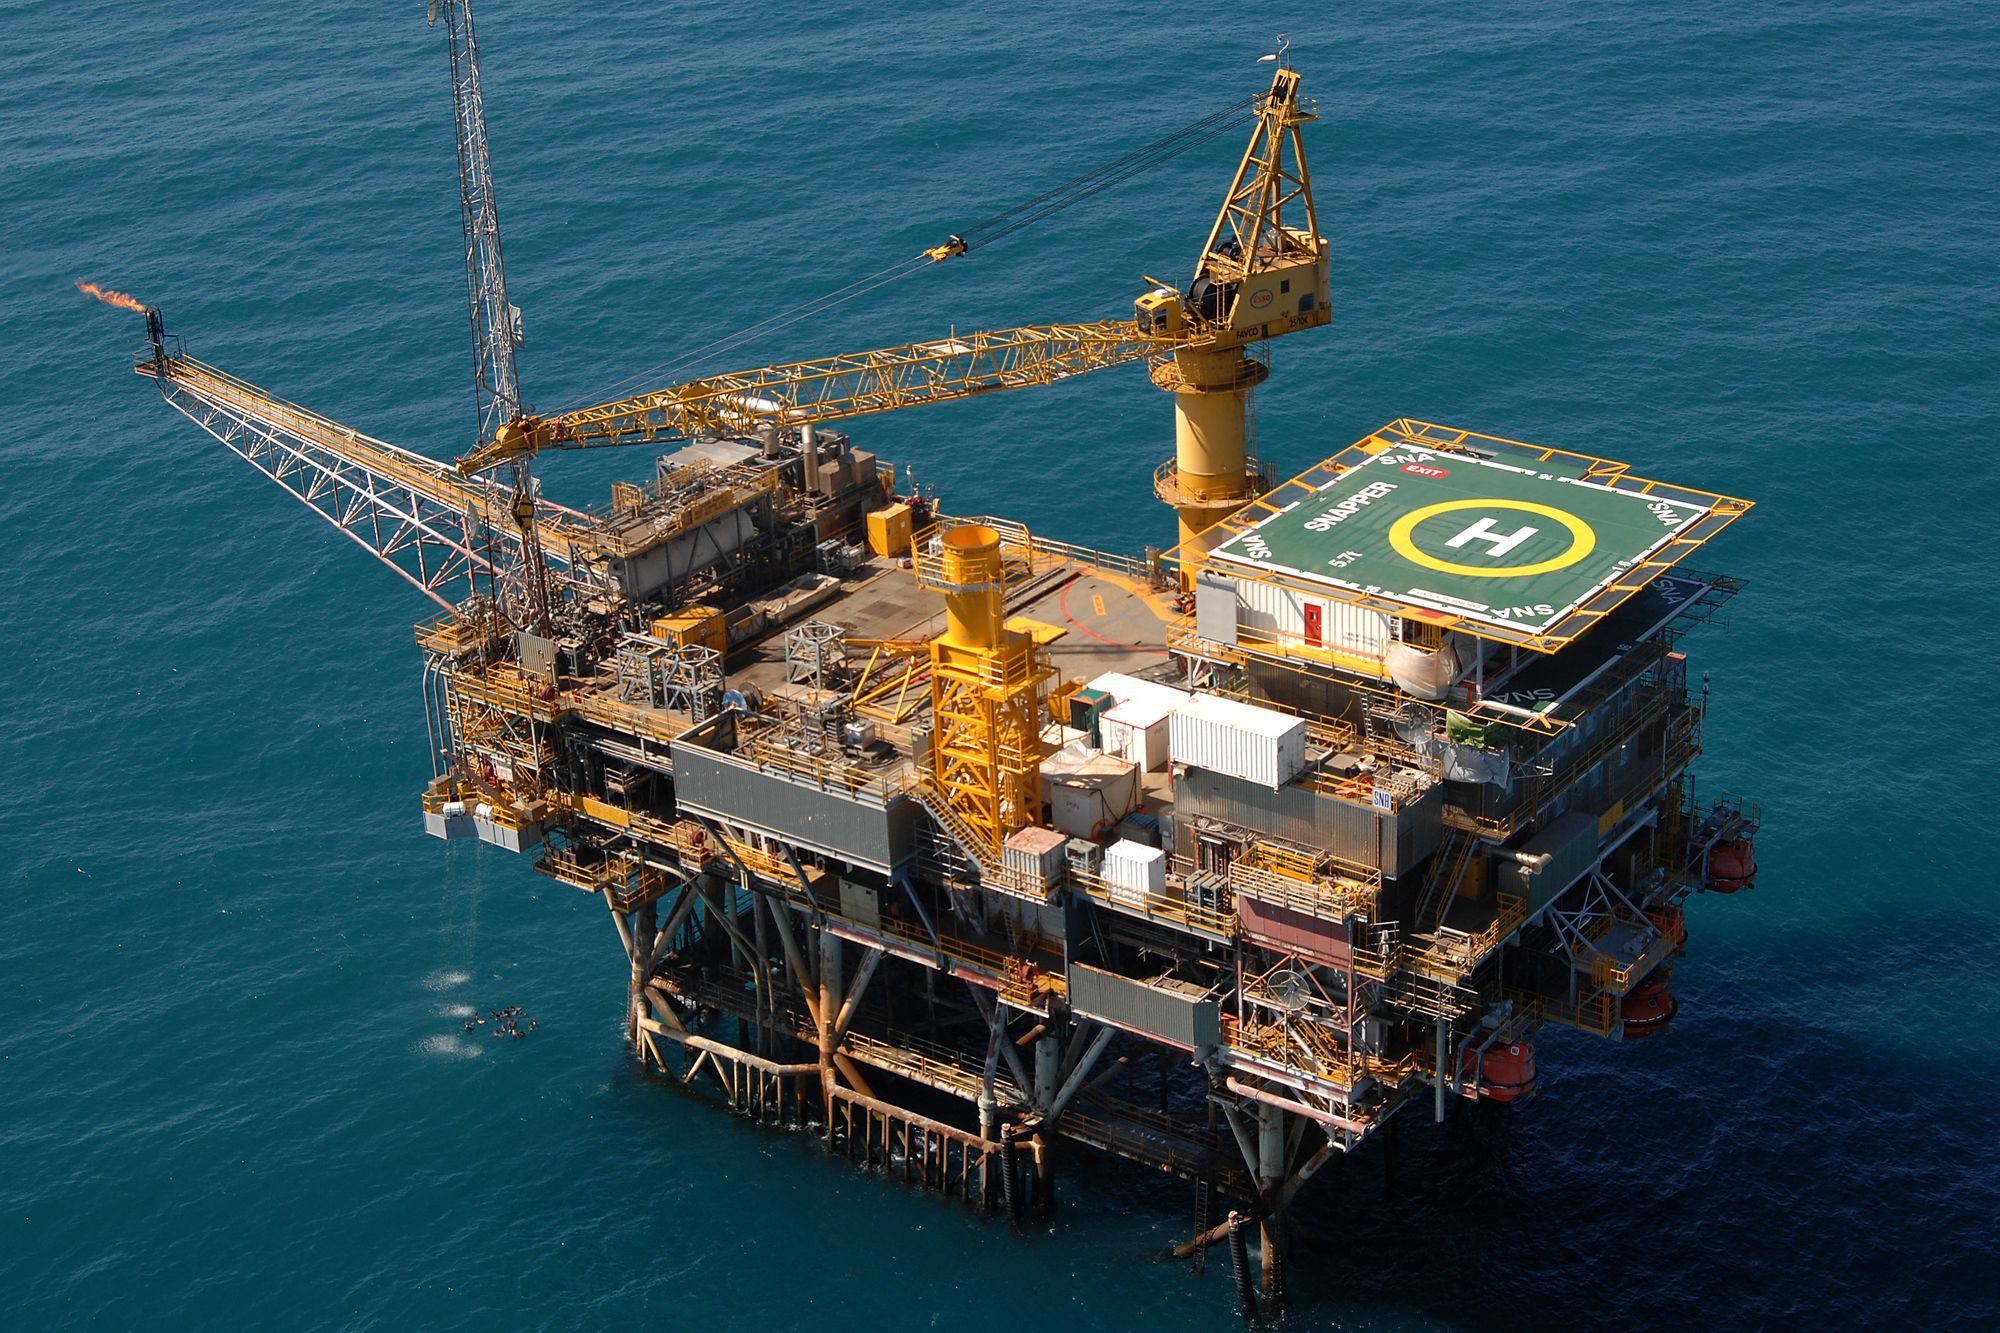 Australian offshore oil and gas industry has a $52B clean-up bill